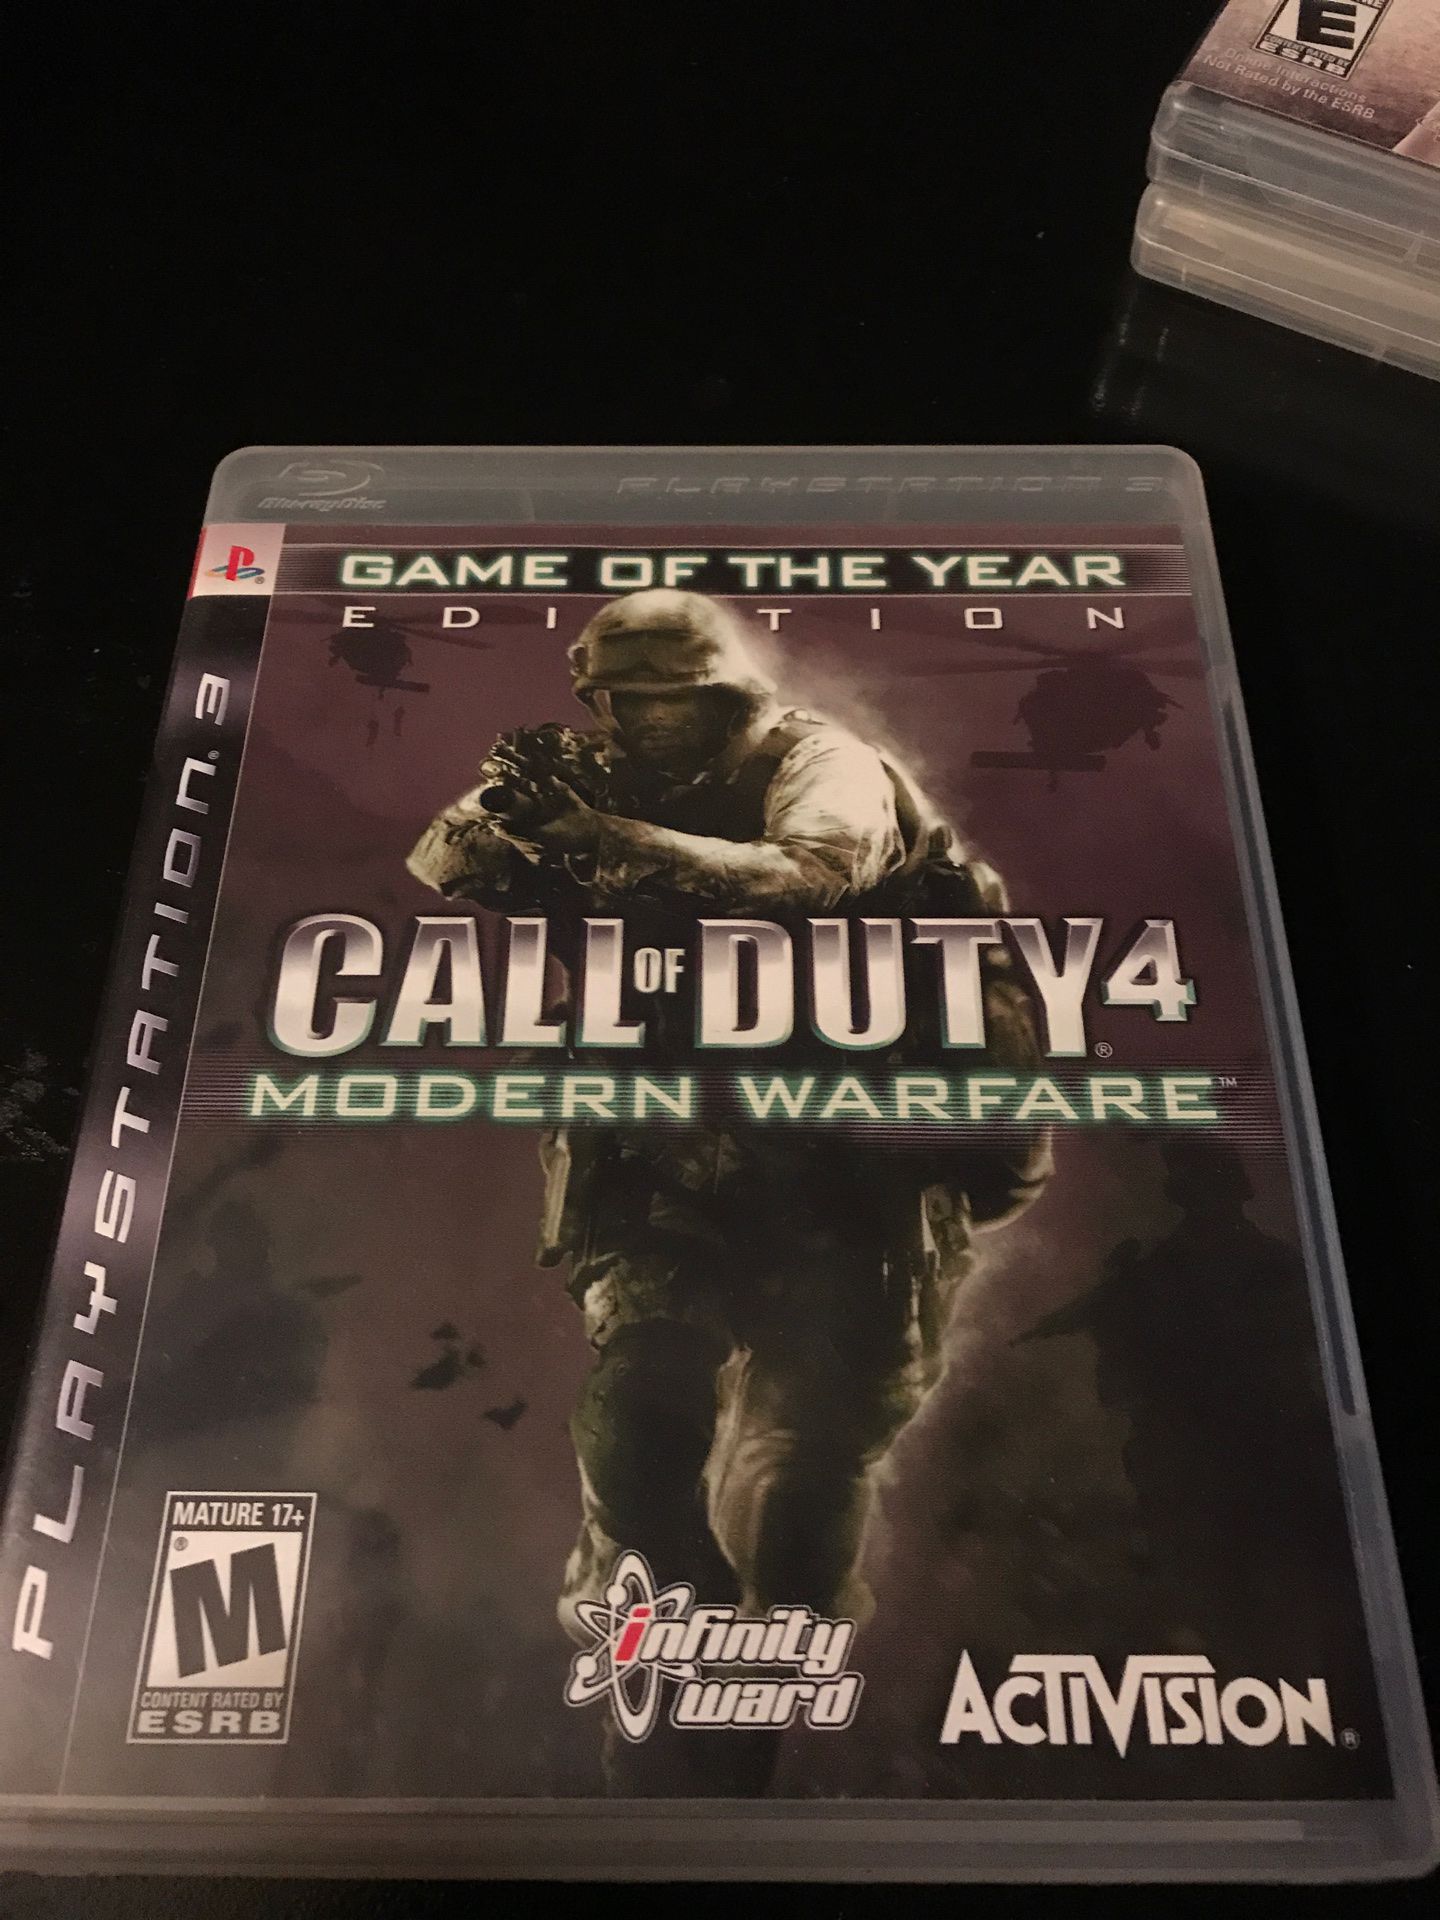 PS3 COD 4 call of duty game of year edition